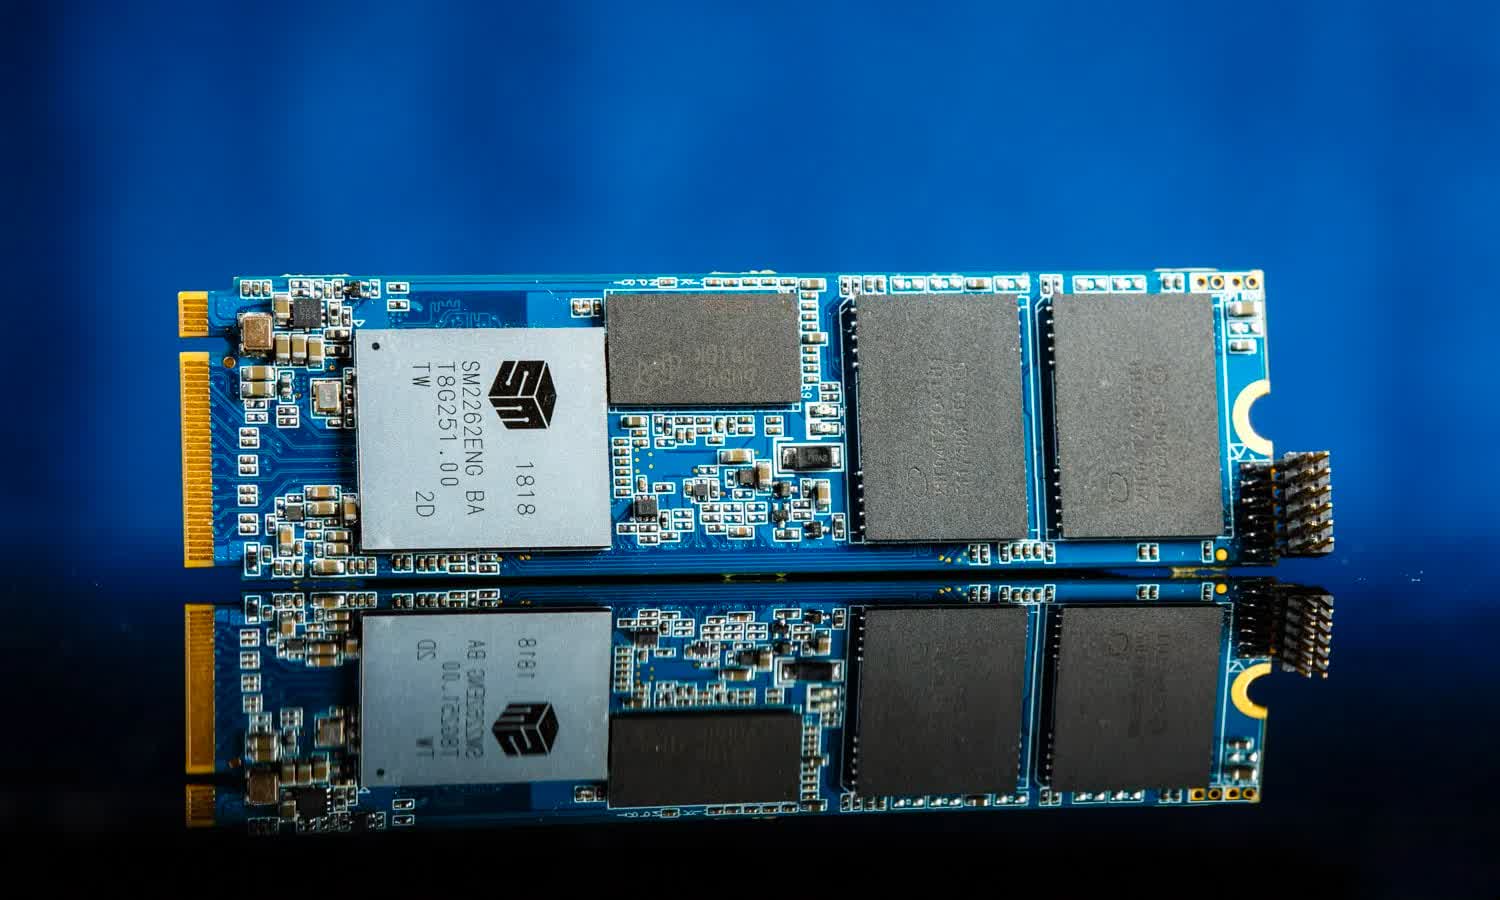 Silicon Motion says it will debut its PCIe 5.0 SSD controller in 2022